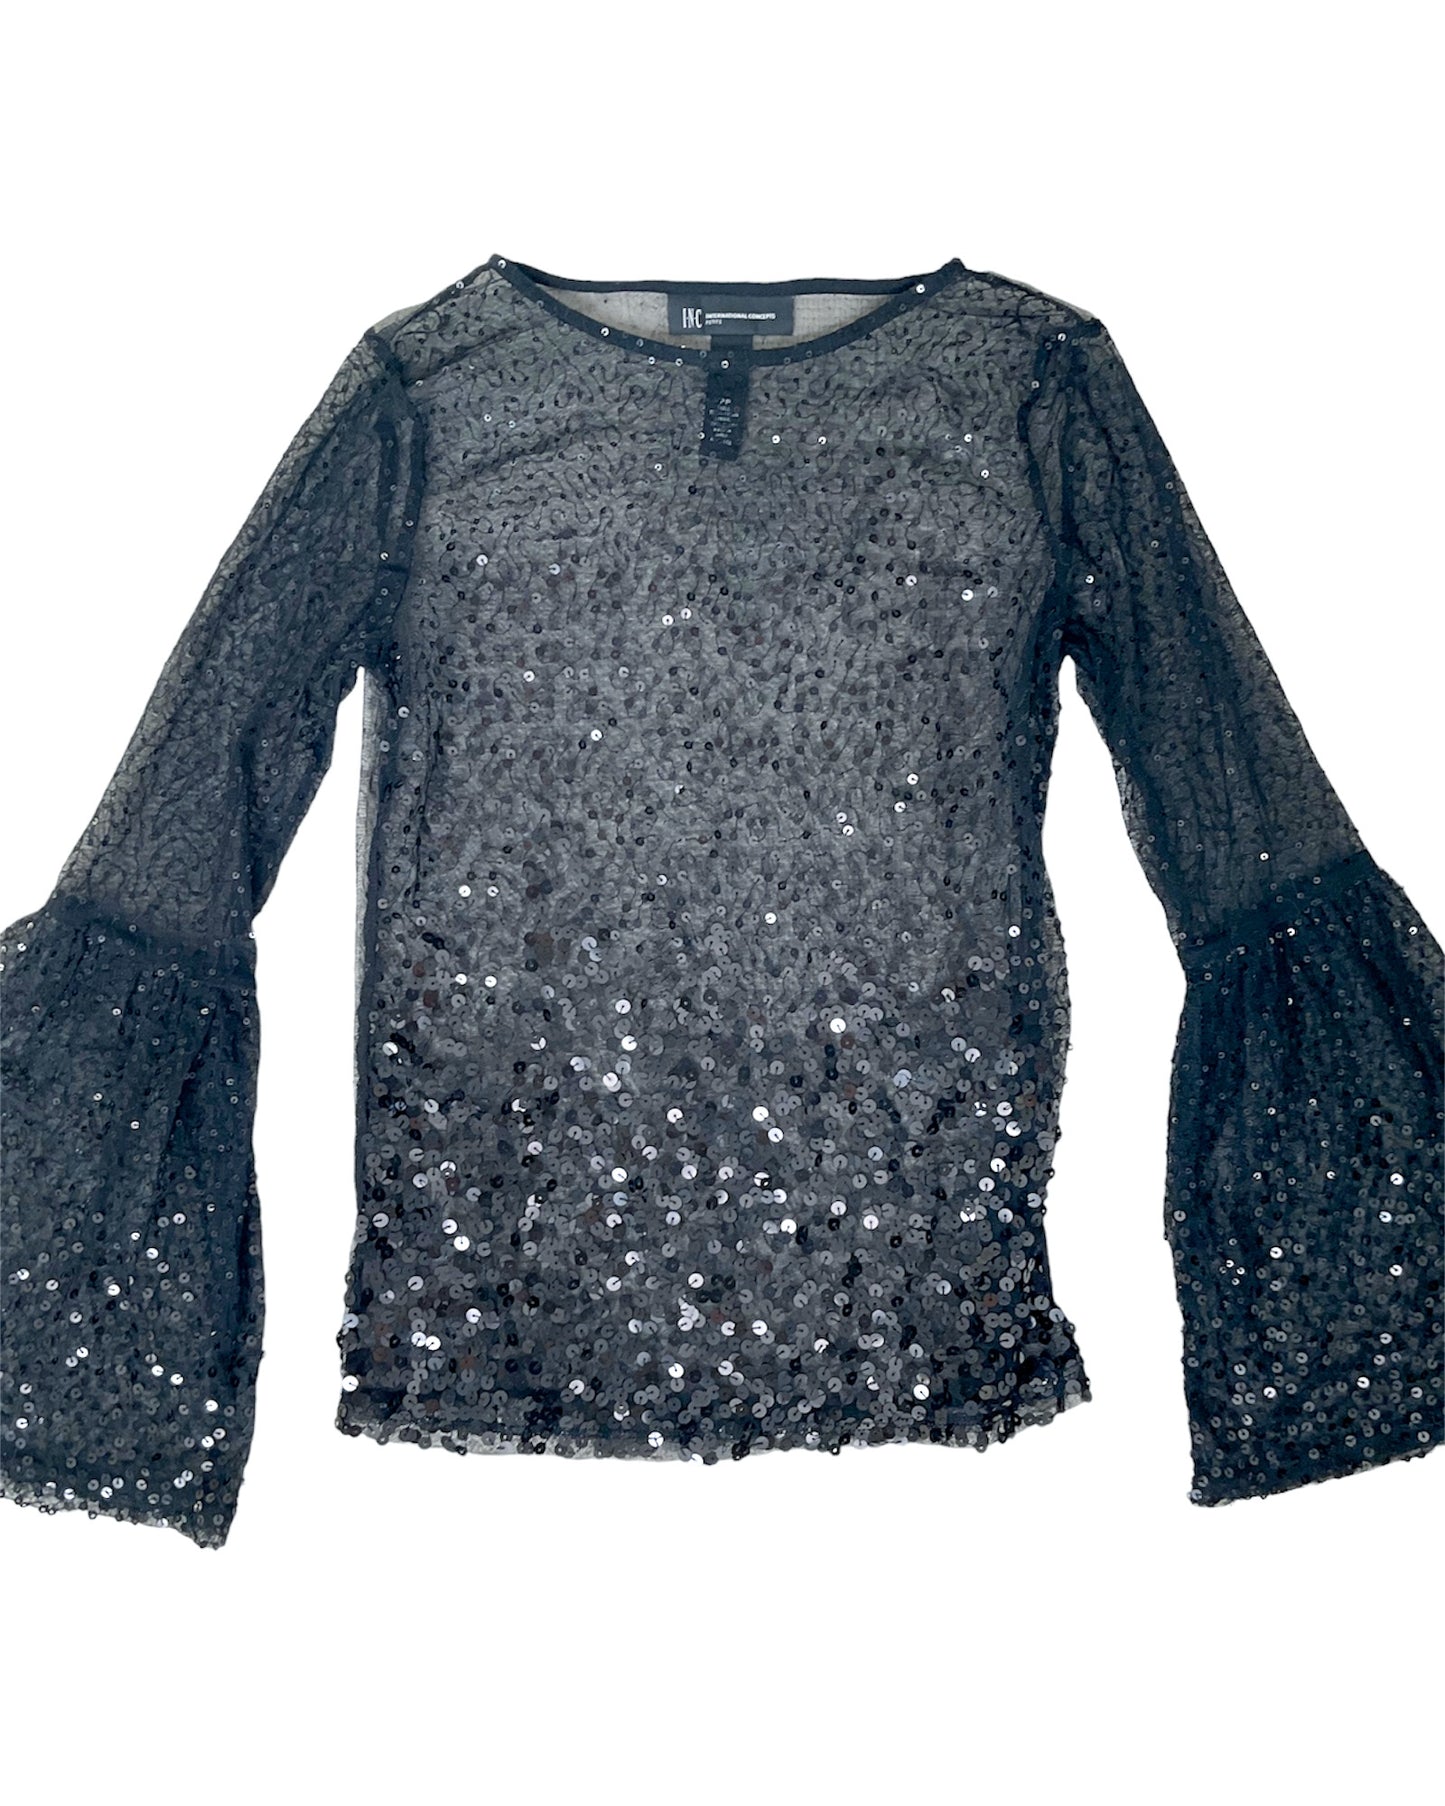 I.N.C Mesh Sparkly Bell Sleeve Top